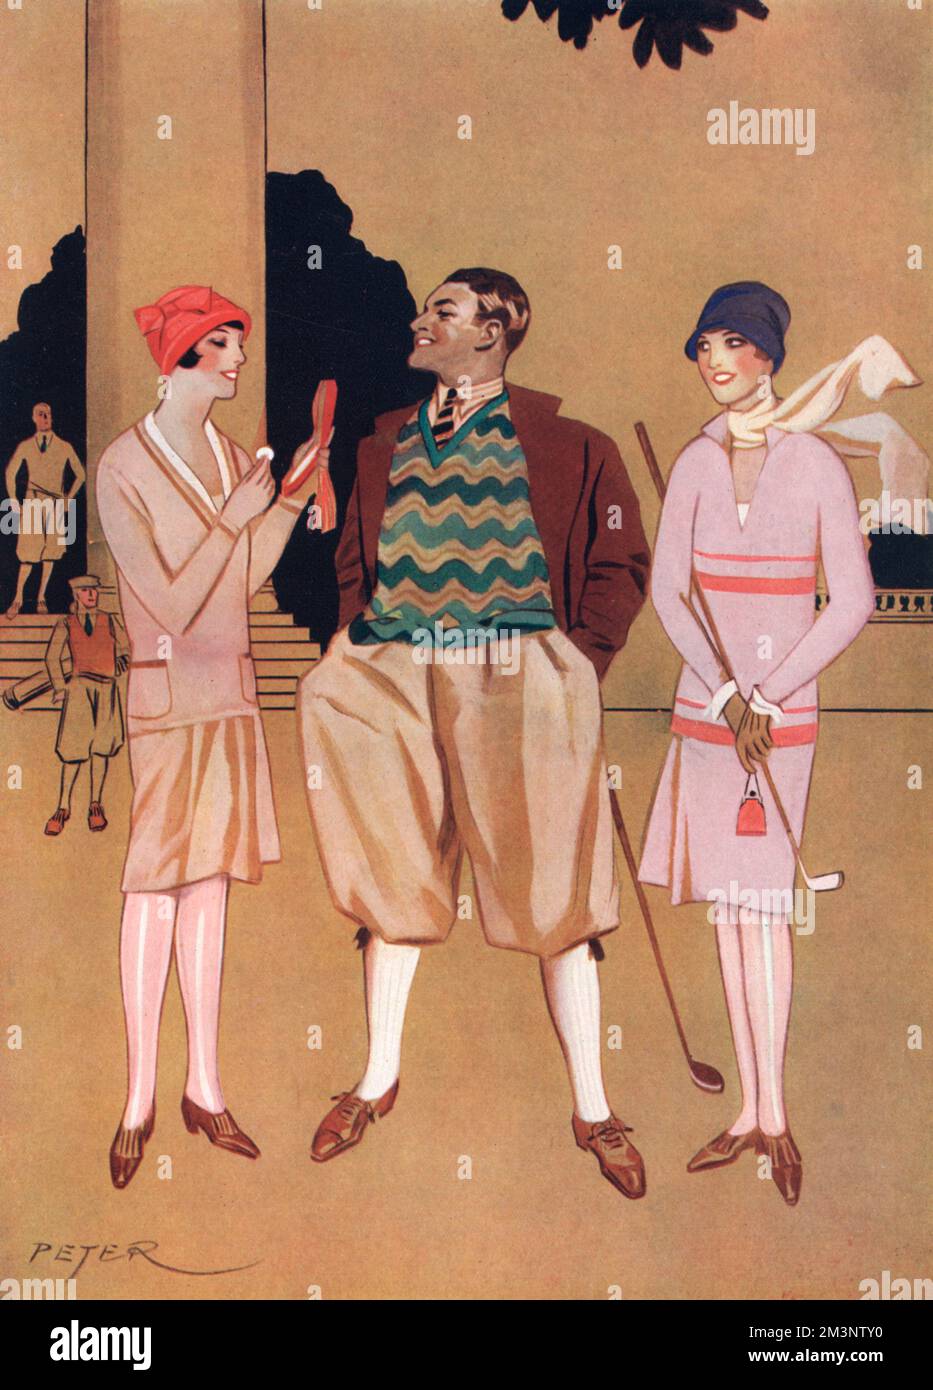 Illustration showing a fashionable trio at famous Scottish golf course, Gleneagles.  The chap in the middle wears wide plus fours and a lurid, patterned tank top.  They wait until one of the lady golfers has powdered her nose before going to tee off.     Date: 1927 Stock Photo